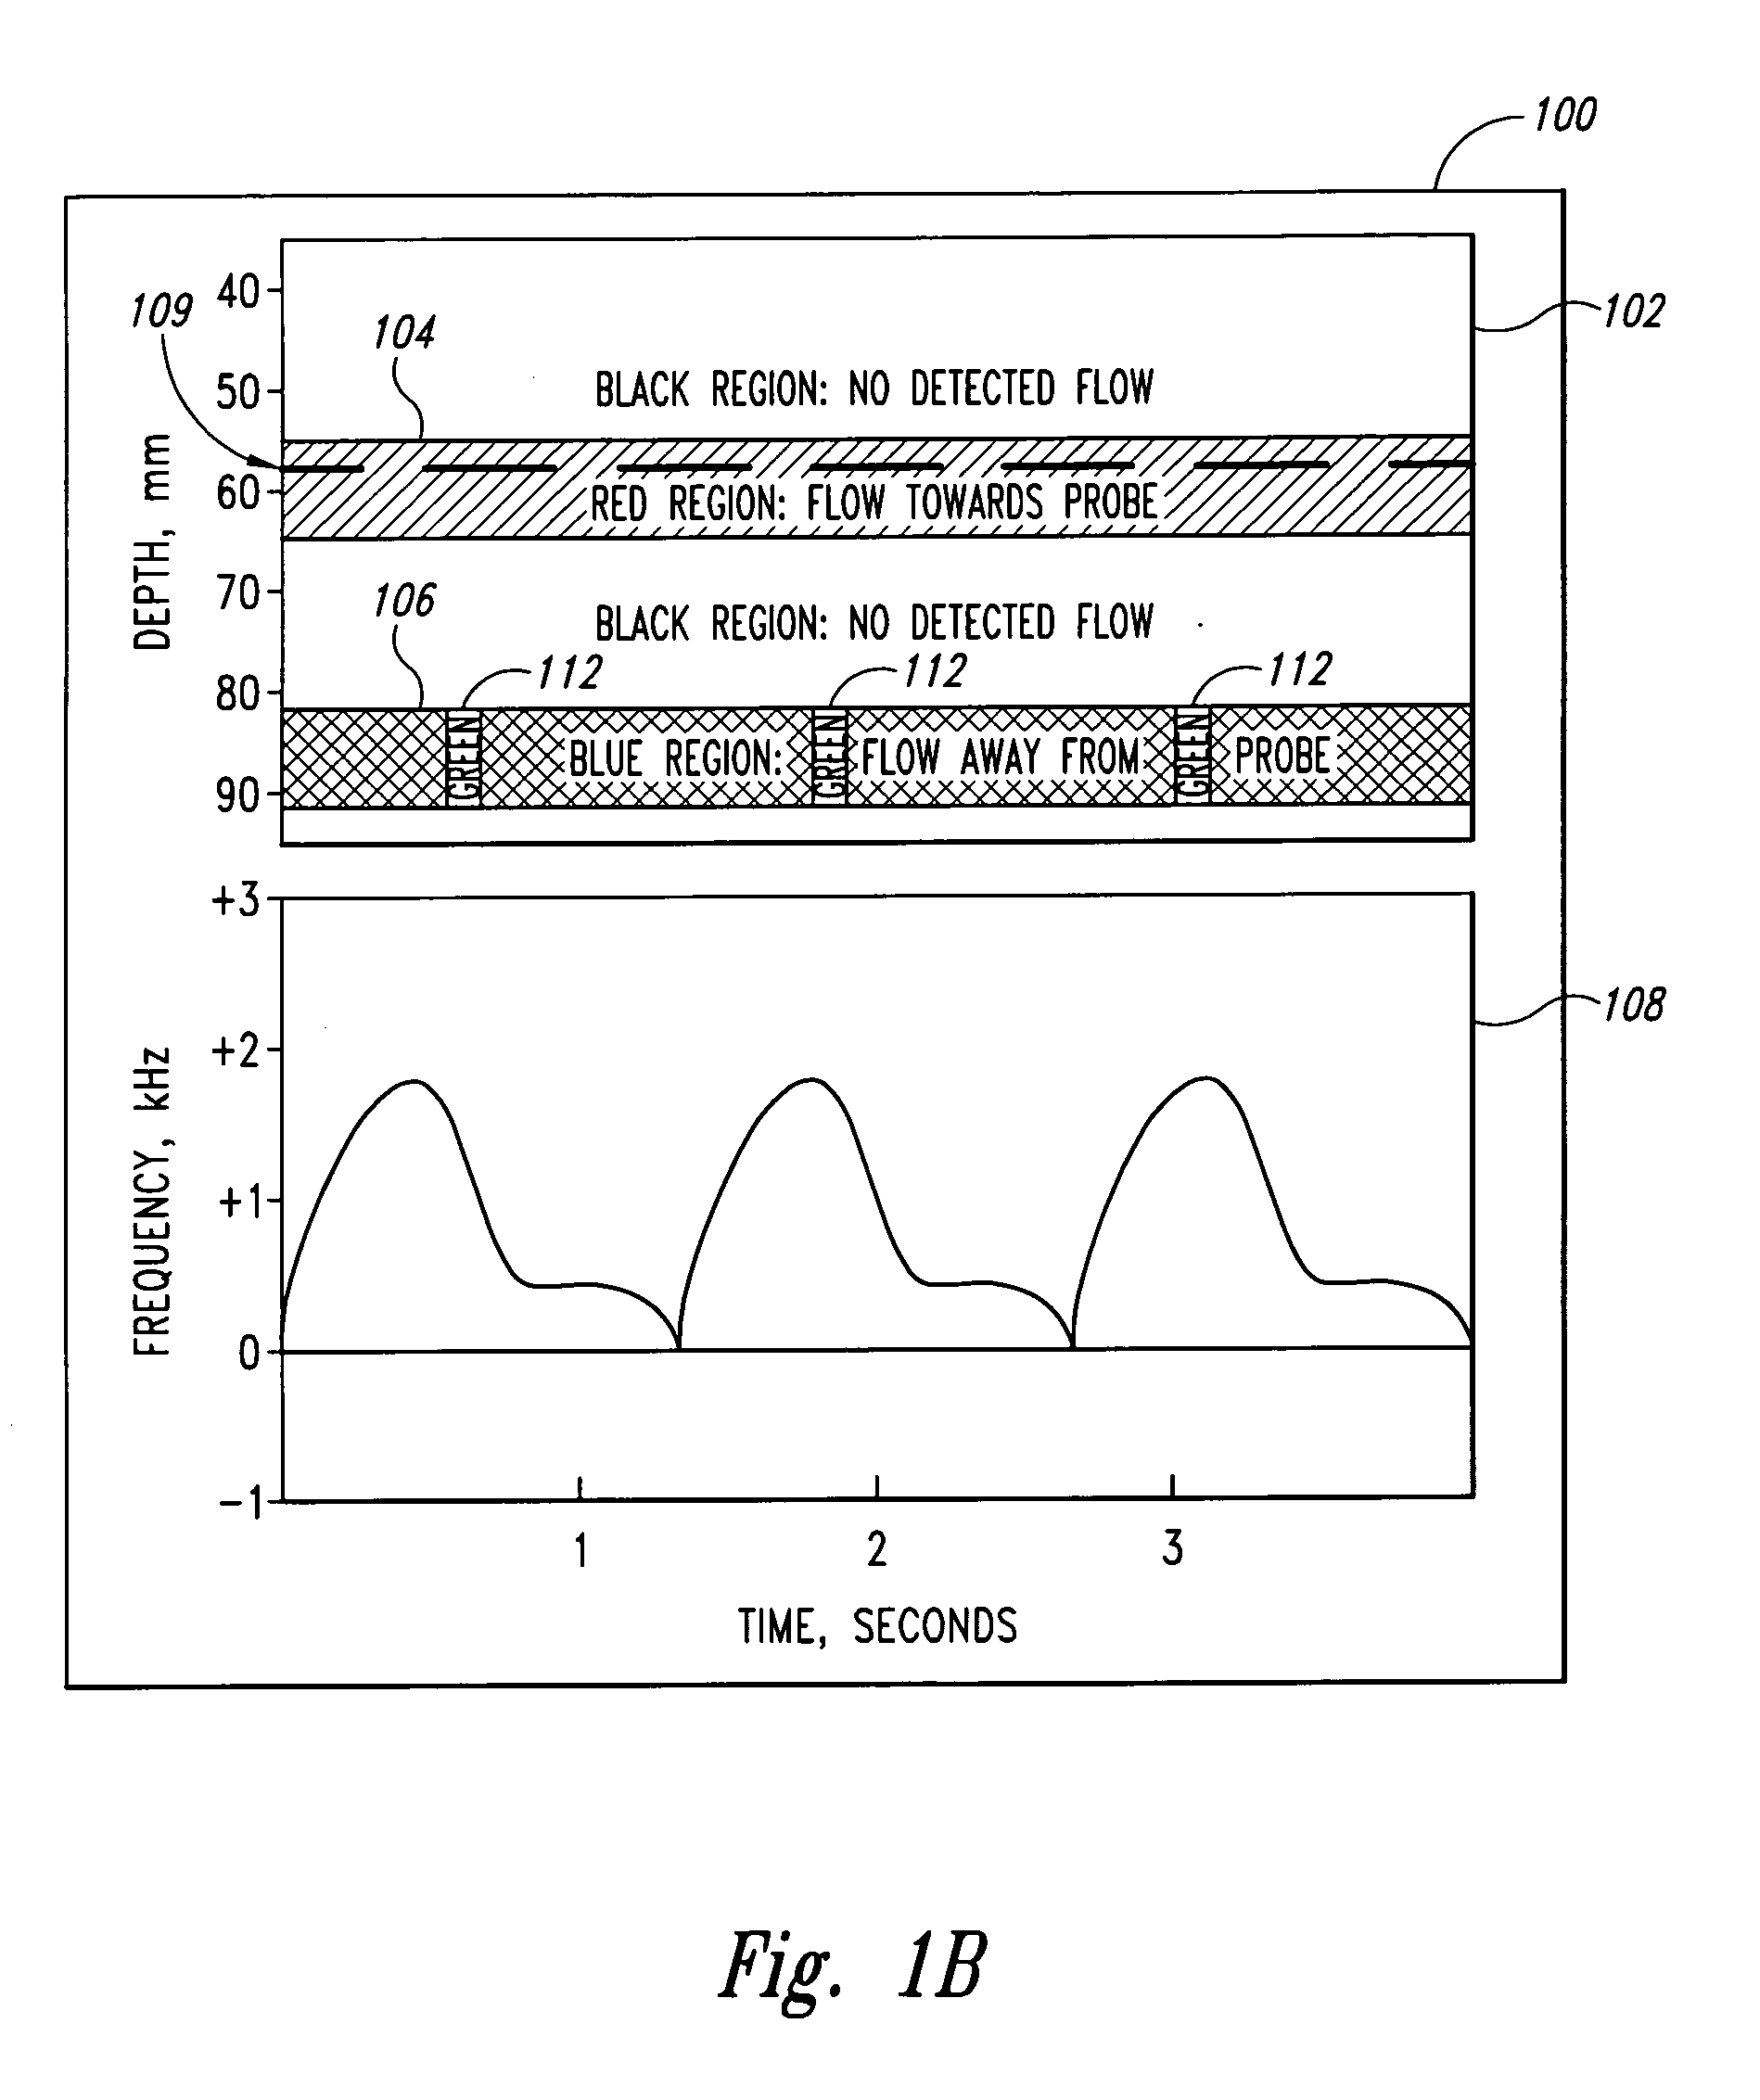 Doppler ultrasound method and apparatus for monitoring blood flow and hemodynamics